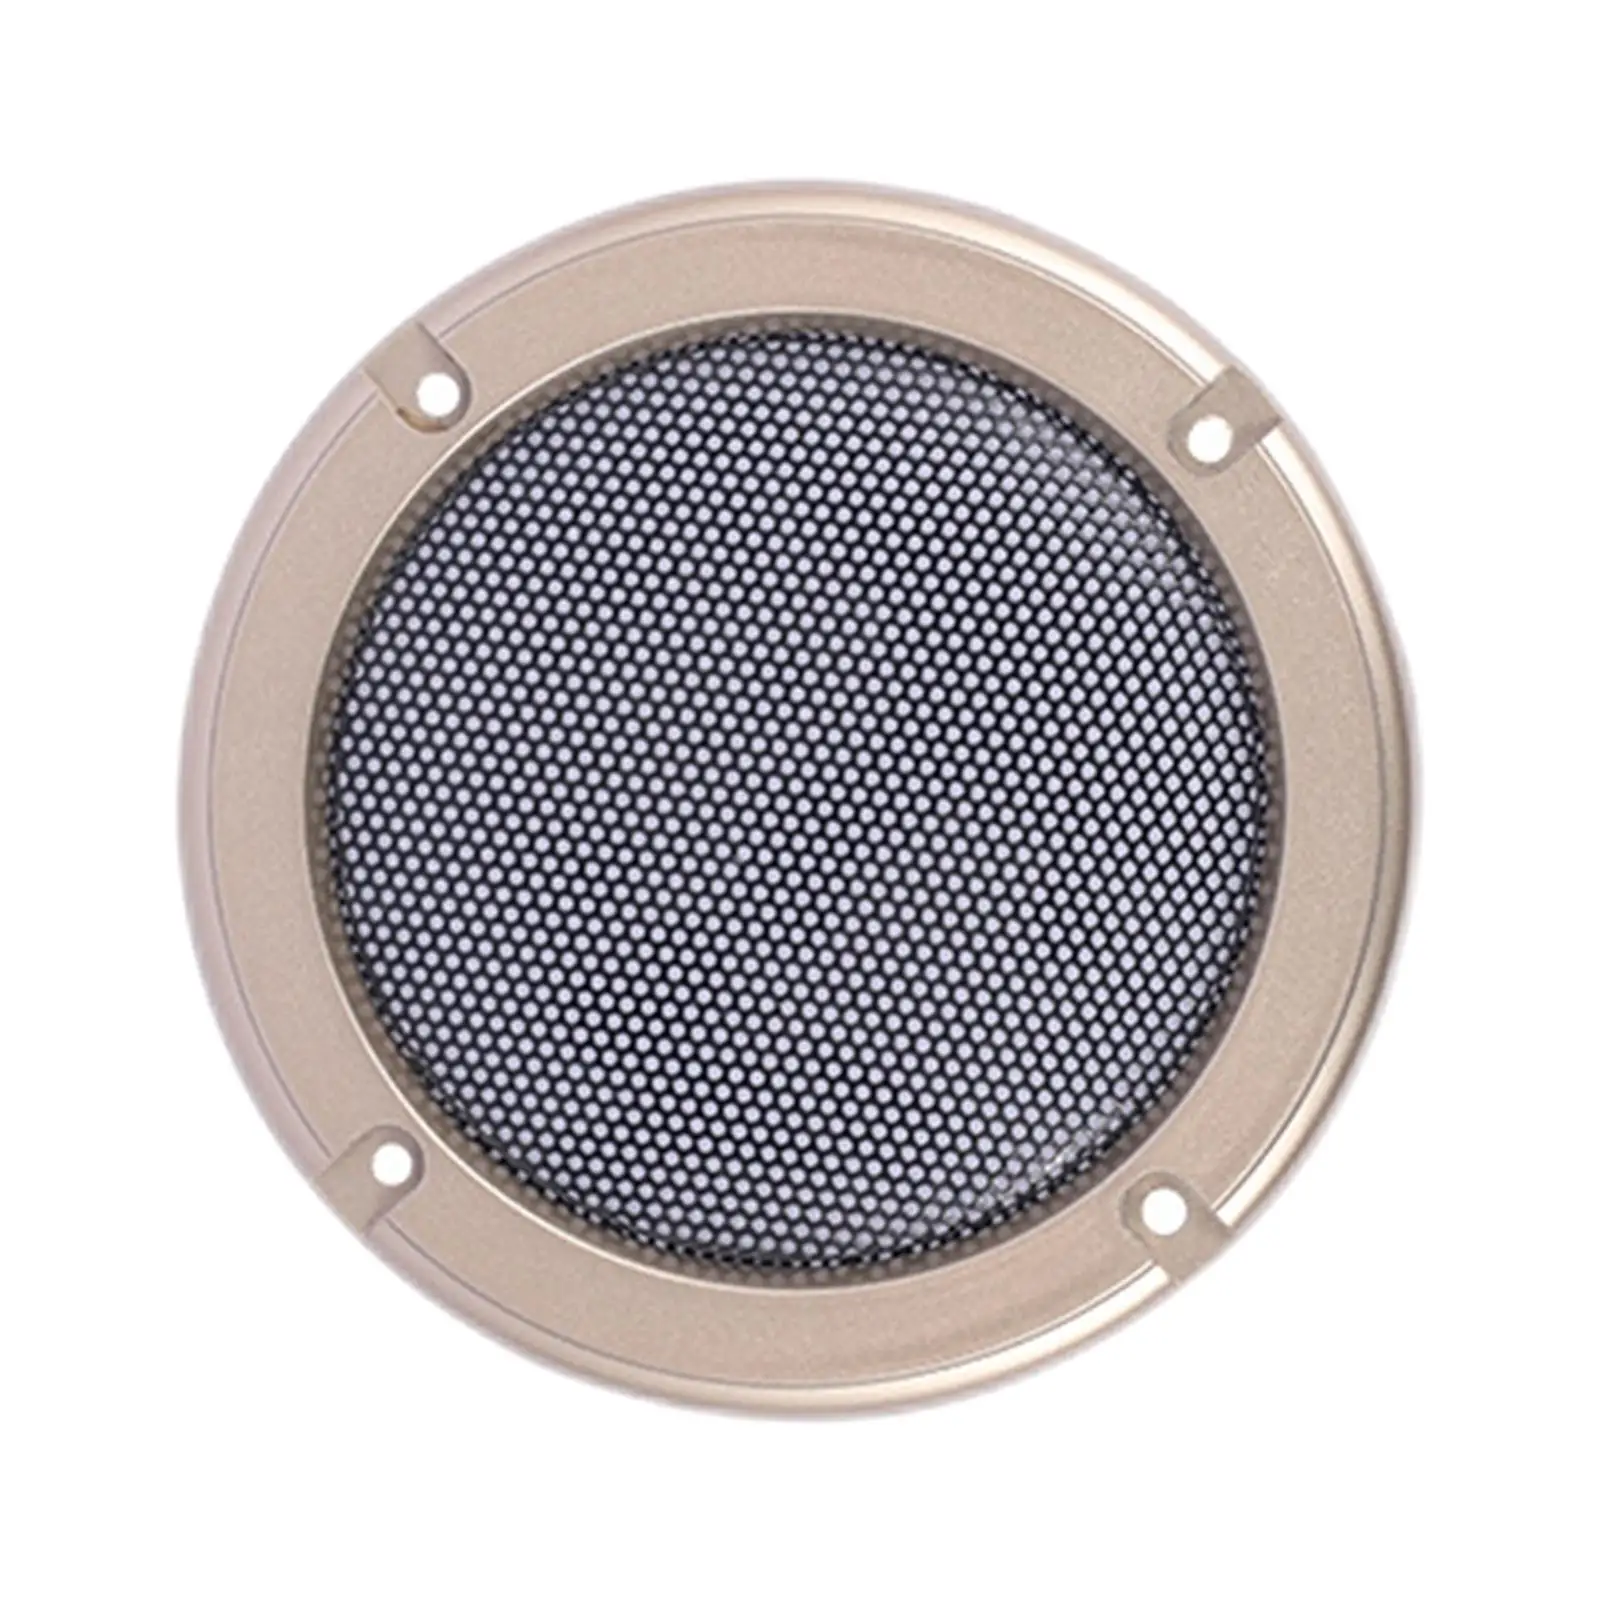 Speaker Grill Mesh Car Speaker Horn Protective Cover Round Woofer Guard Protector Audio Accessories Enclosure Net Metal Mesh